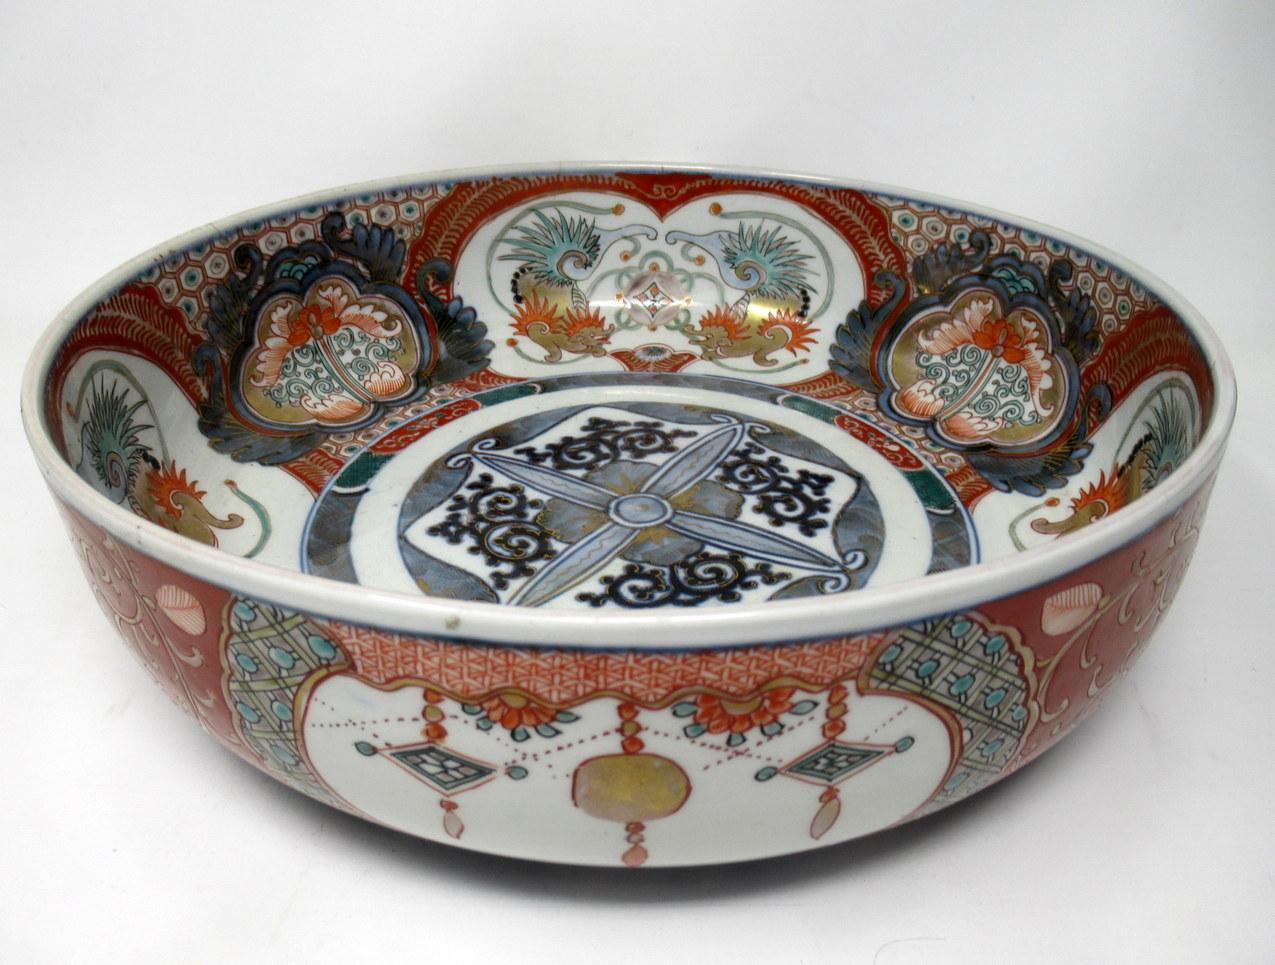 Stunning large Japanese Imari circular deep dish or centerpiece of outstanding quality, made during the last quarter of the 19th century. 

Hand decorated with all over typical decorative Imari palette in colours of iron red dark blue on an off